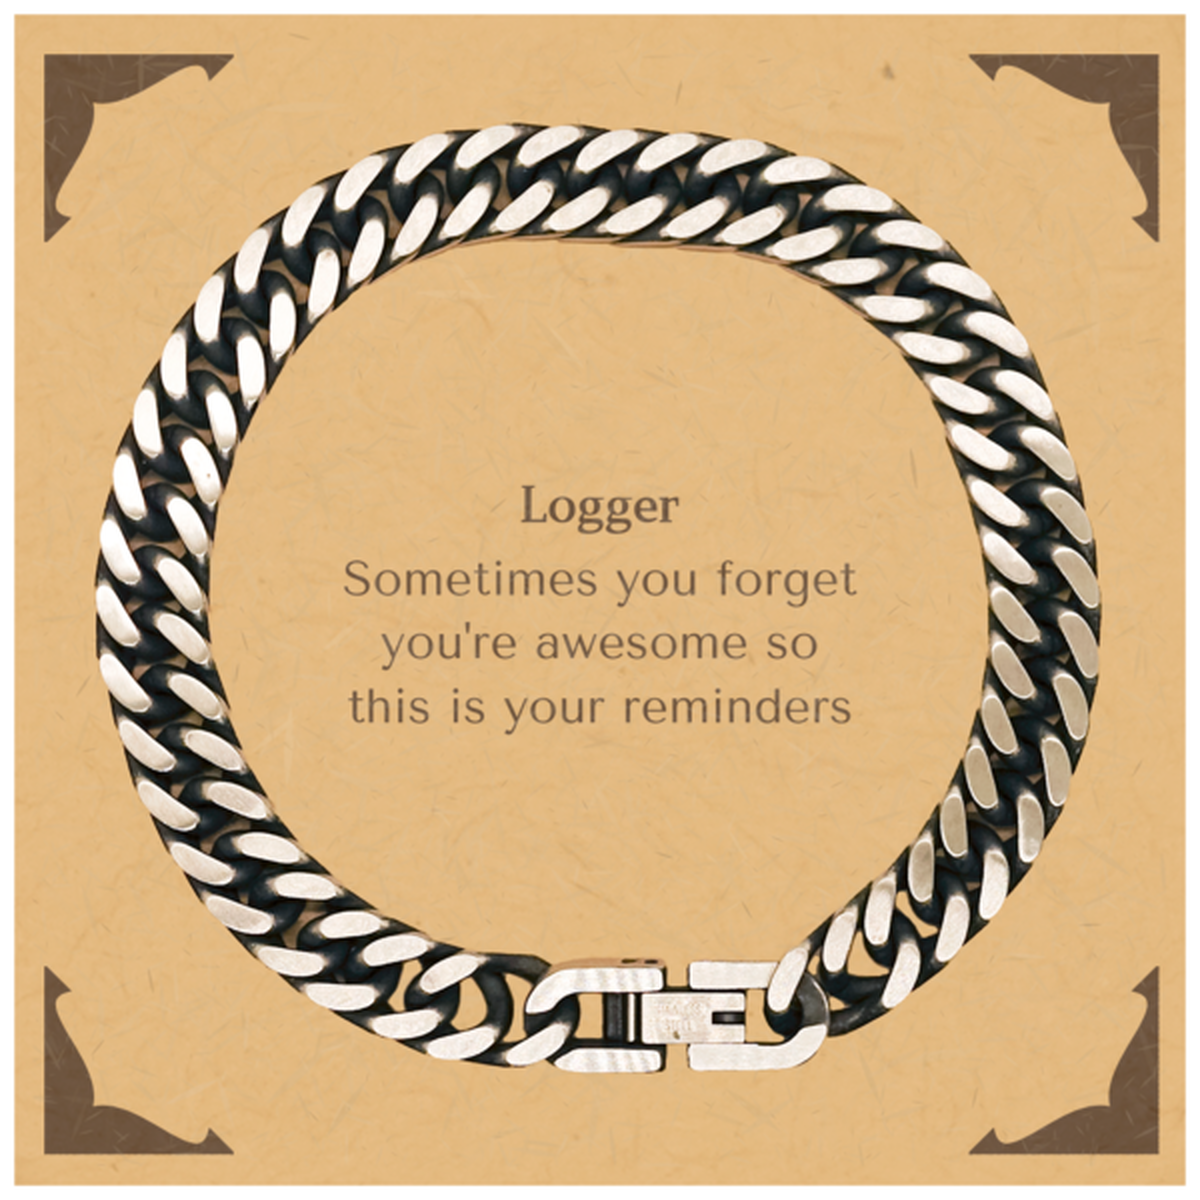 Sentimental Logger Cuban Link Chain Bracelet, Logger Sometimes you forget you're awesome so this is your reminders, Graduation Christmas Birthday Gifts for Logger, Men, Women, Coworkers